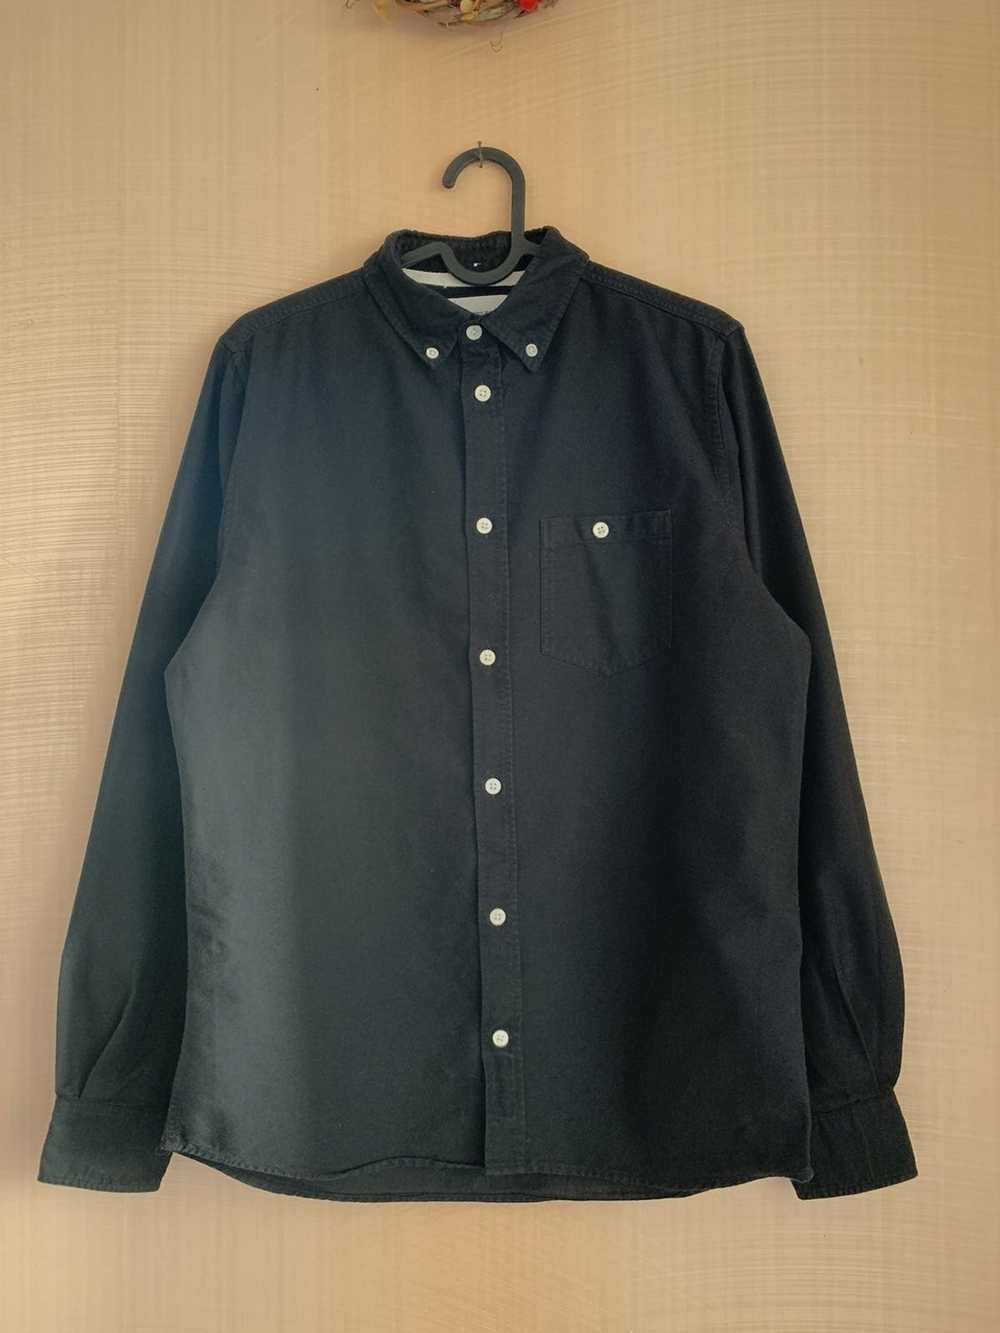 Norse Projects Norse Projects black shirt size S - image 2